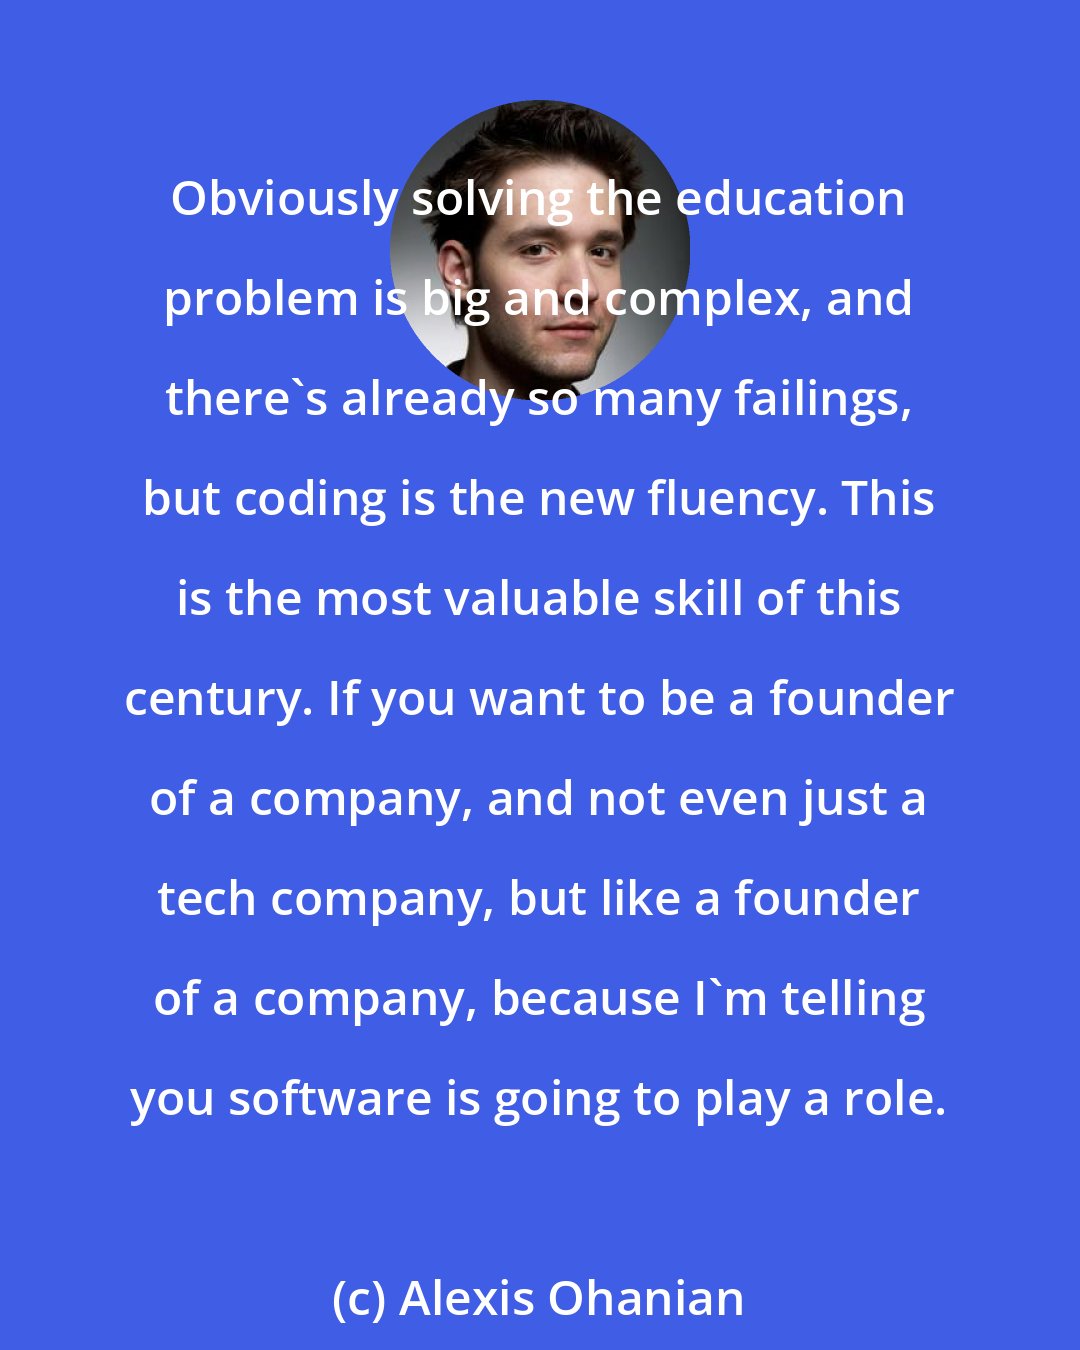 Alexis Ohanian: Obviously solving the education problem is big and complex, and there's already so many failings, but coding is the new fluency. This is the most valuable skill of this century. If you want to be a founder of a company, and not even just a tech company, but like a founder of a company, because I'm telling you software is going to play a role.